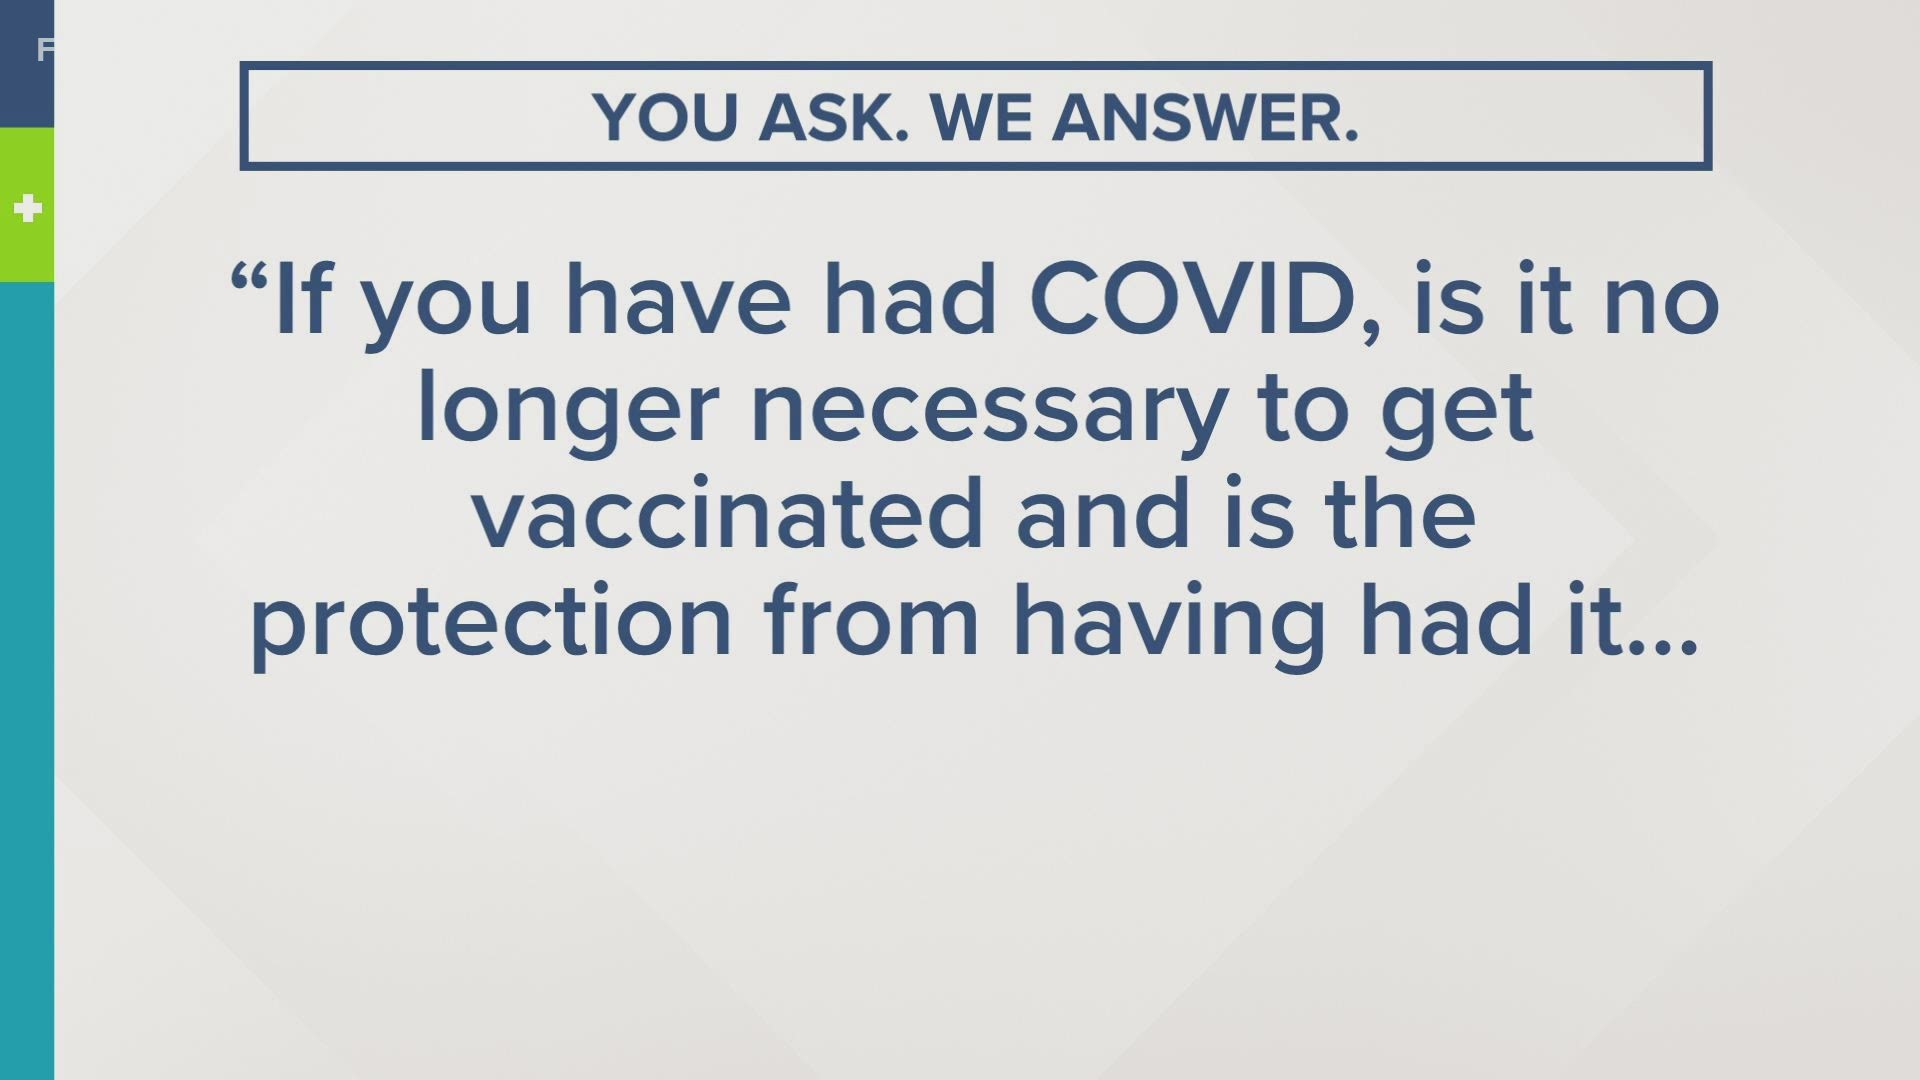 The short answer is medical experts don’t know exactly what protection you get by having COVID-19.